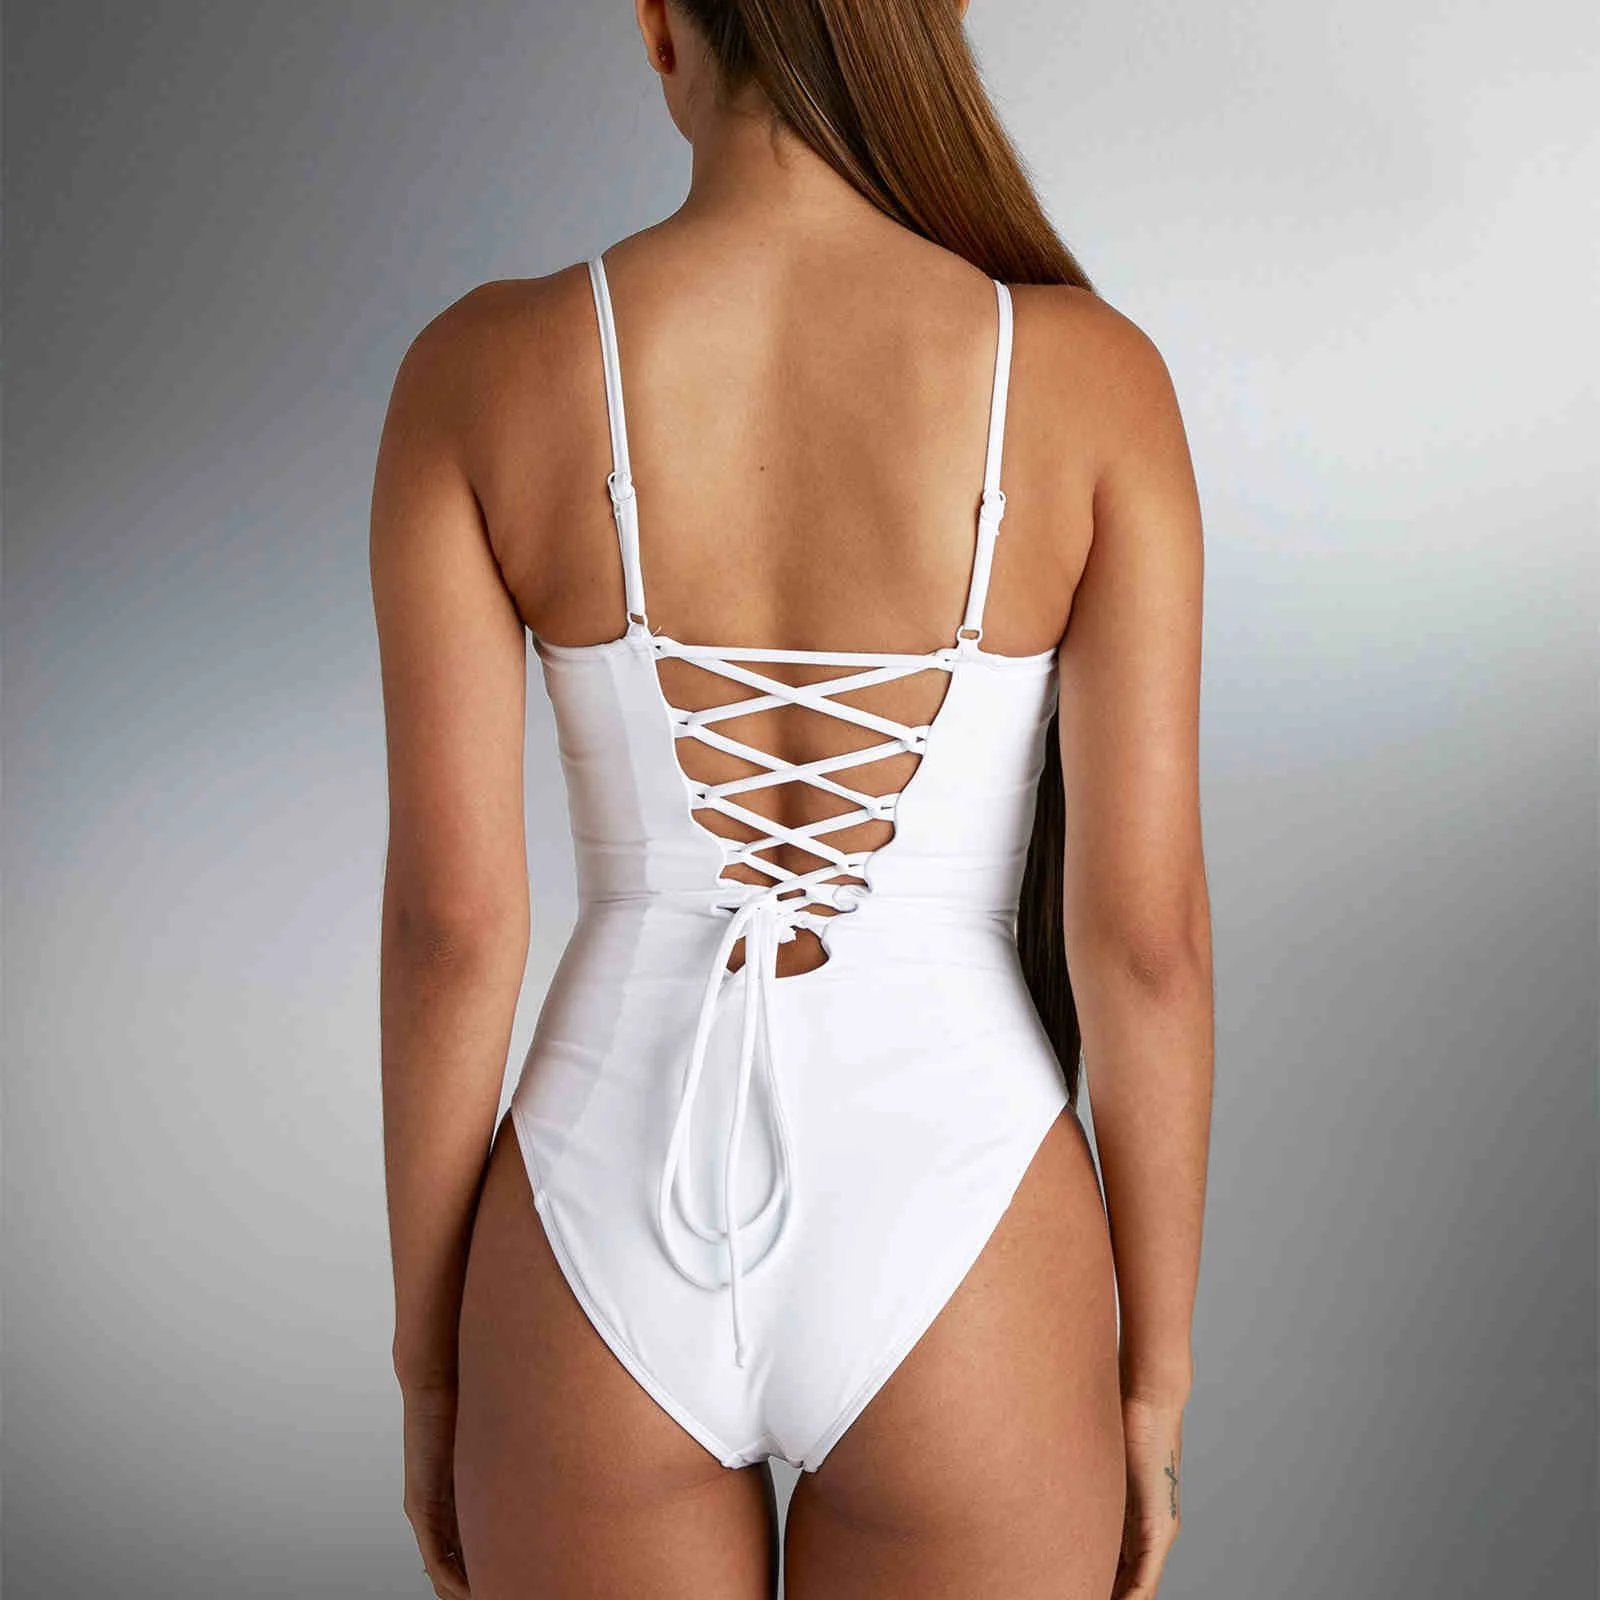 🔥Sculpting Corset Swimsuits🎉BUY 2 GET FREE SHIPPING💐